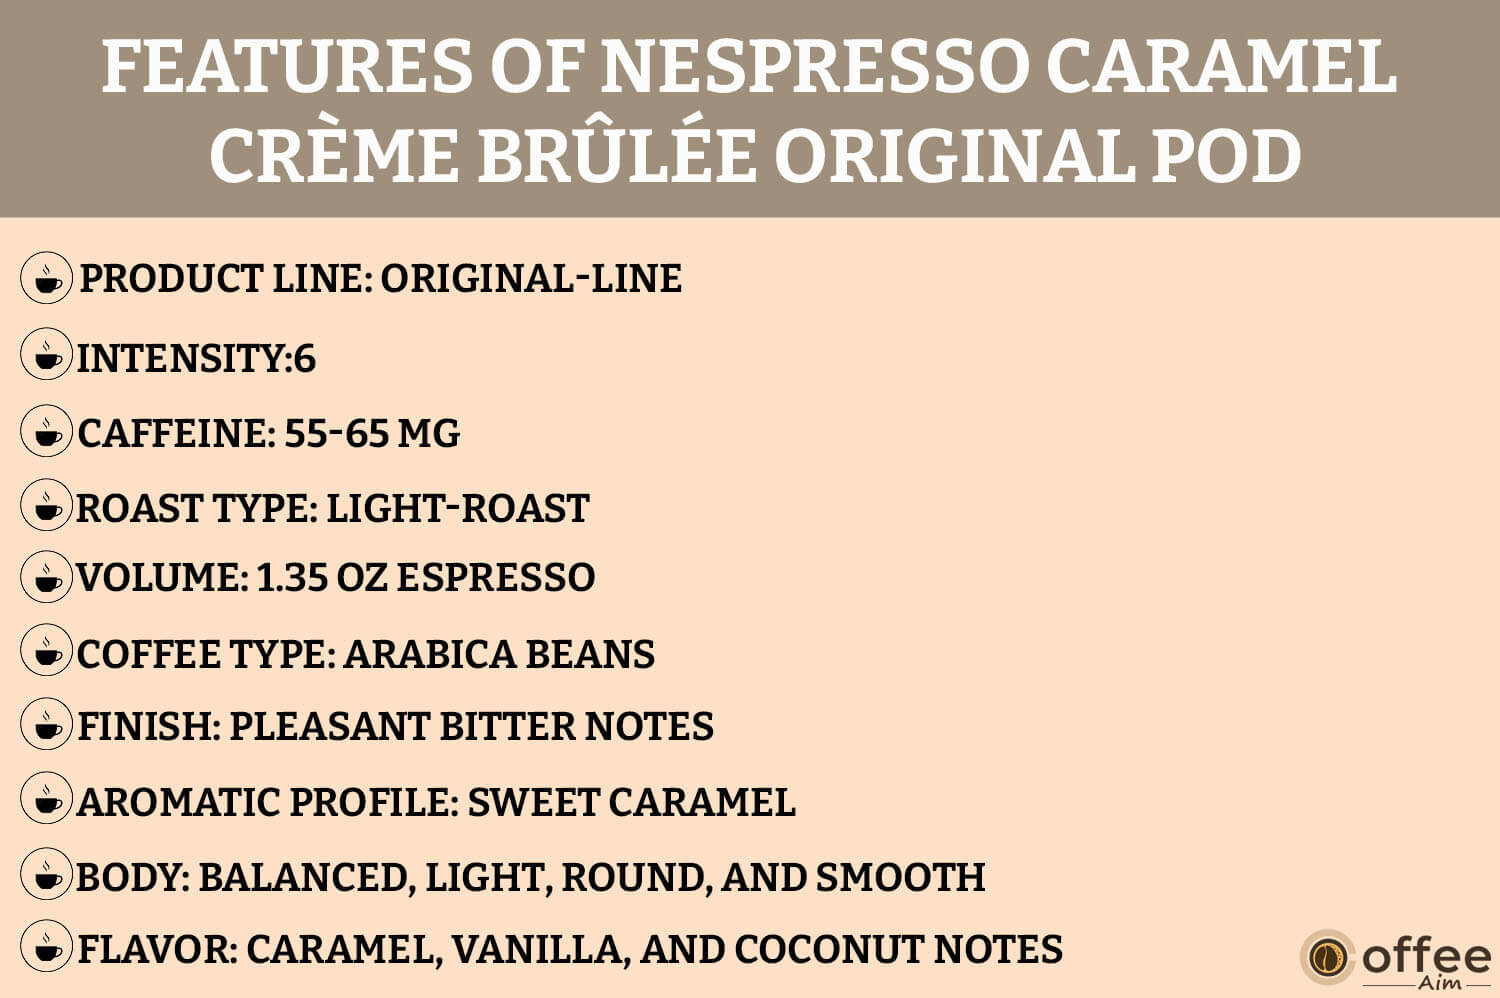 
The image highlights Nespresso Barista Caramel Creme Brulee features.